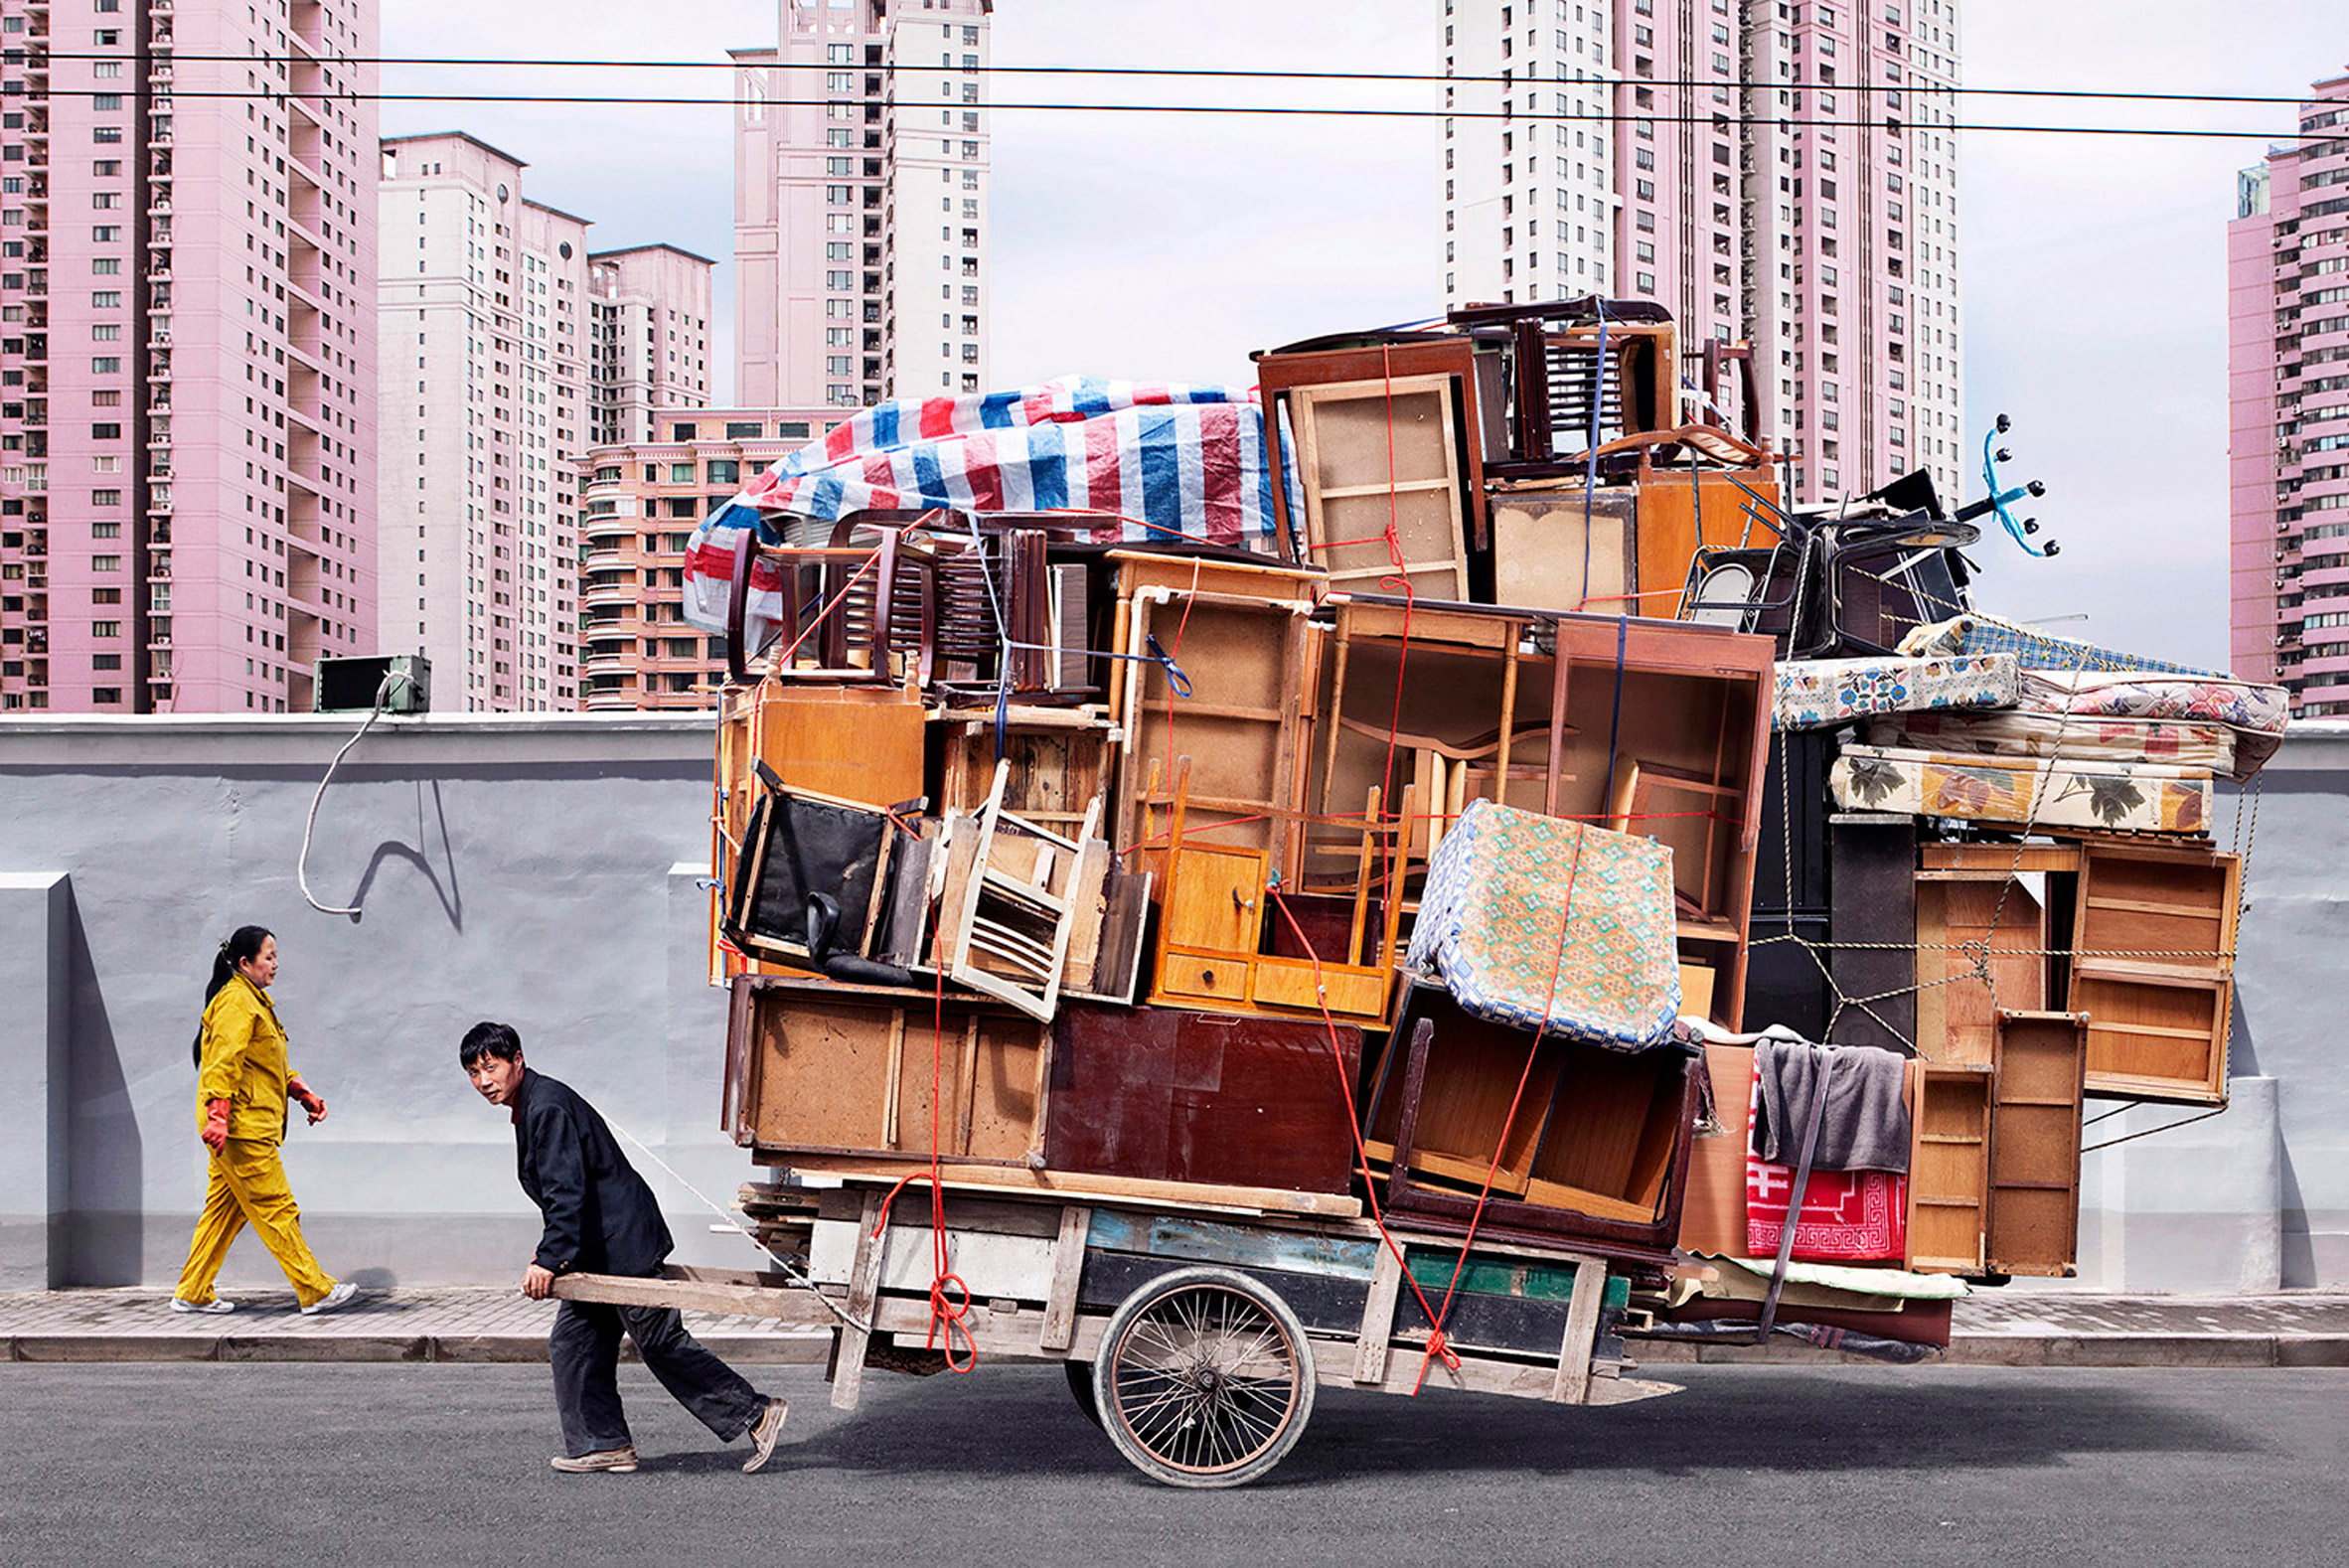 Workers carry impossible furniture loads in Alain Delorme's Totems photographs